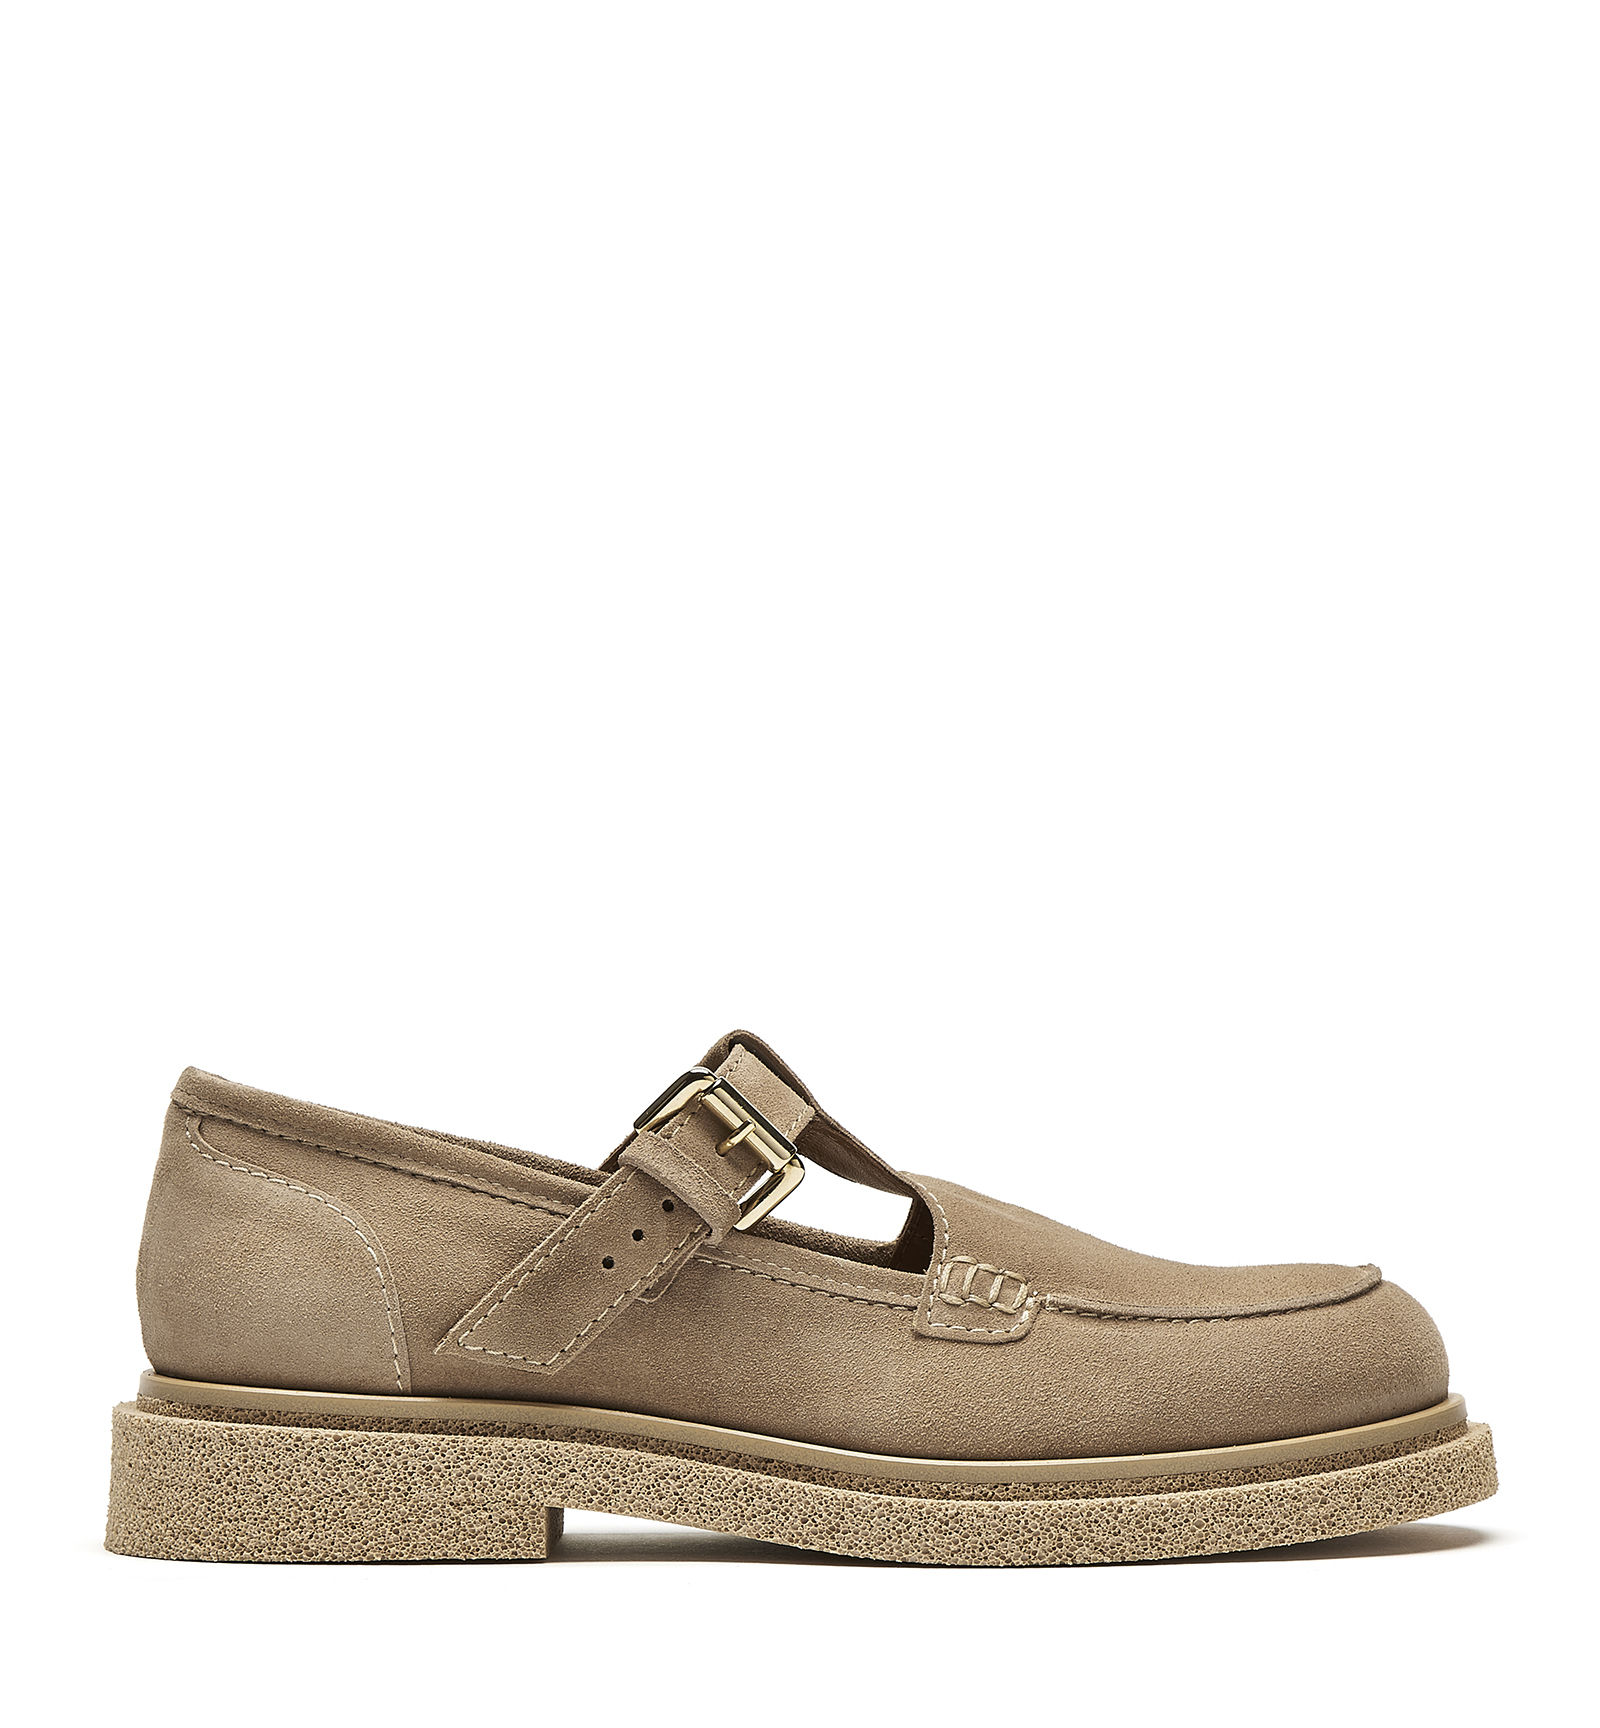 La Canadienne Relax Suede Loafer In Sand